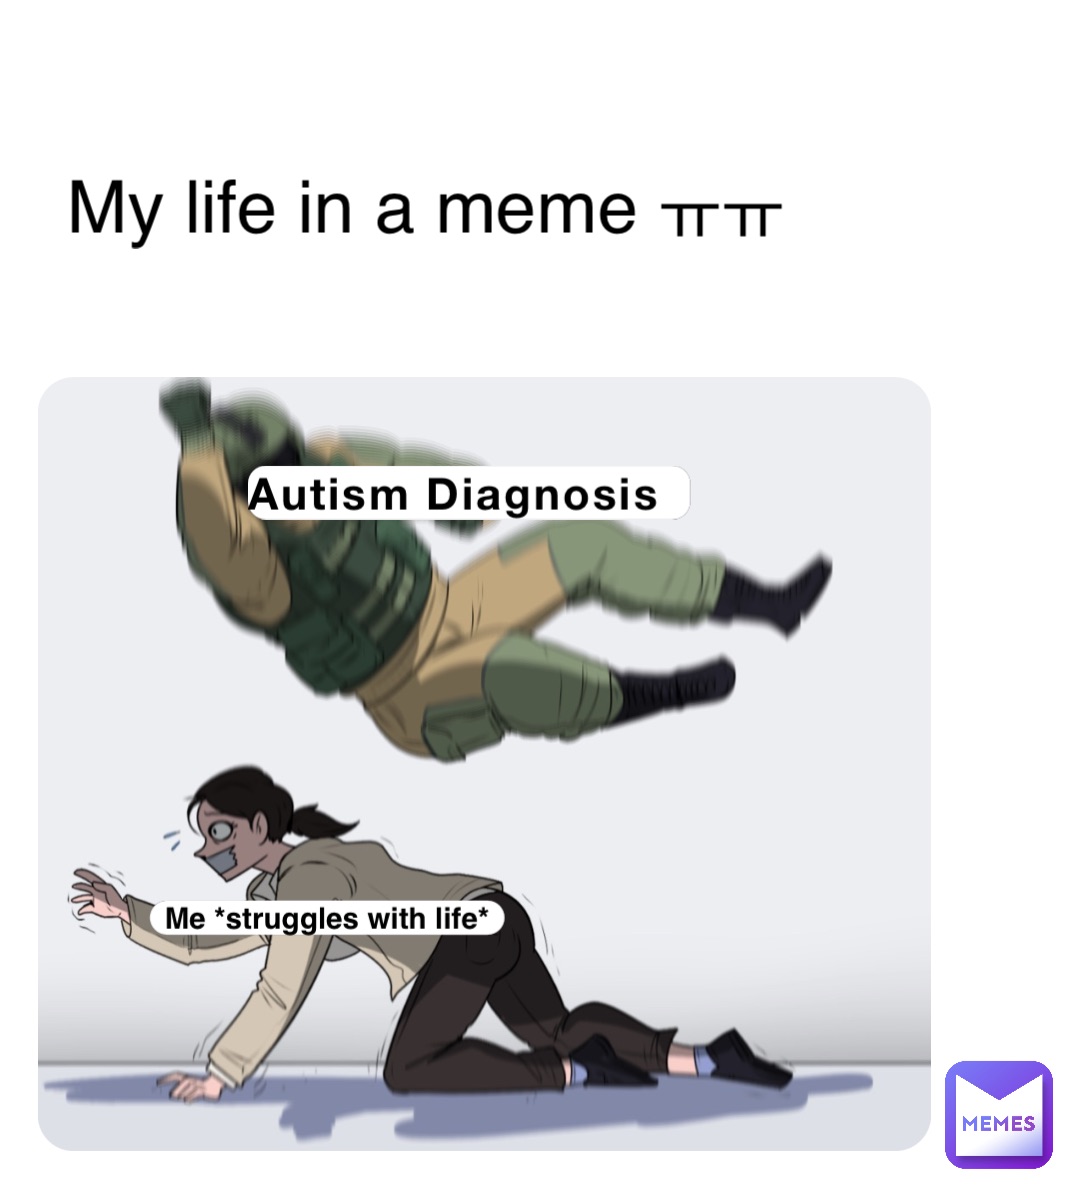 Autism Diagnosis Me *struggles with life* My life in a meme ㅠㅠ